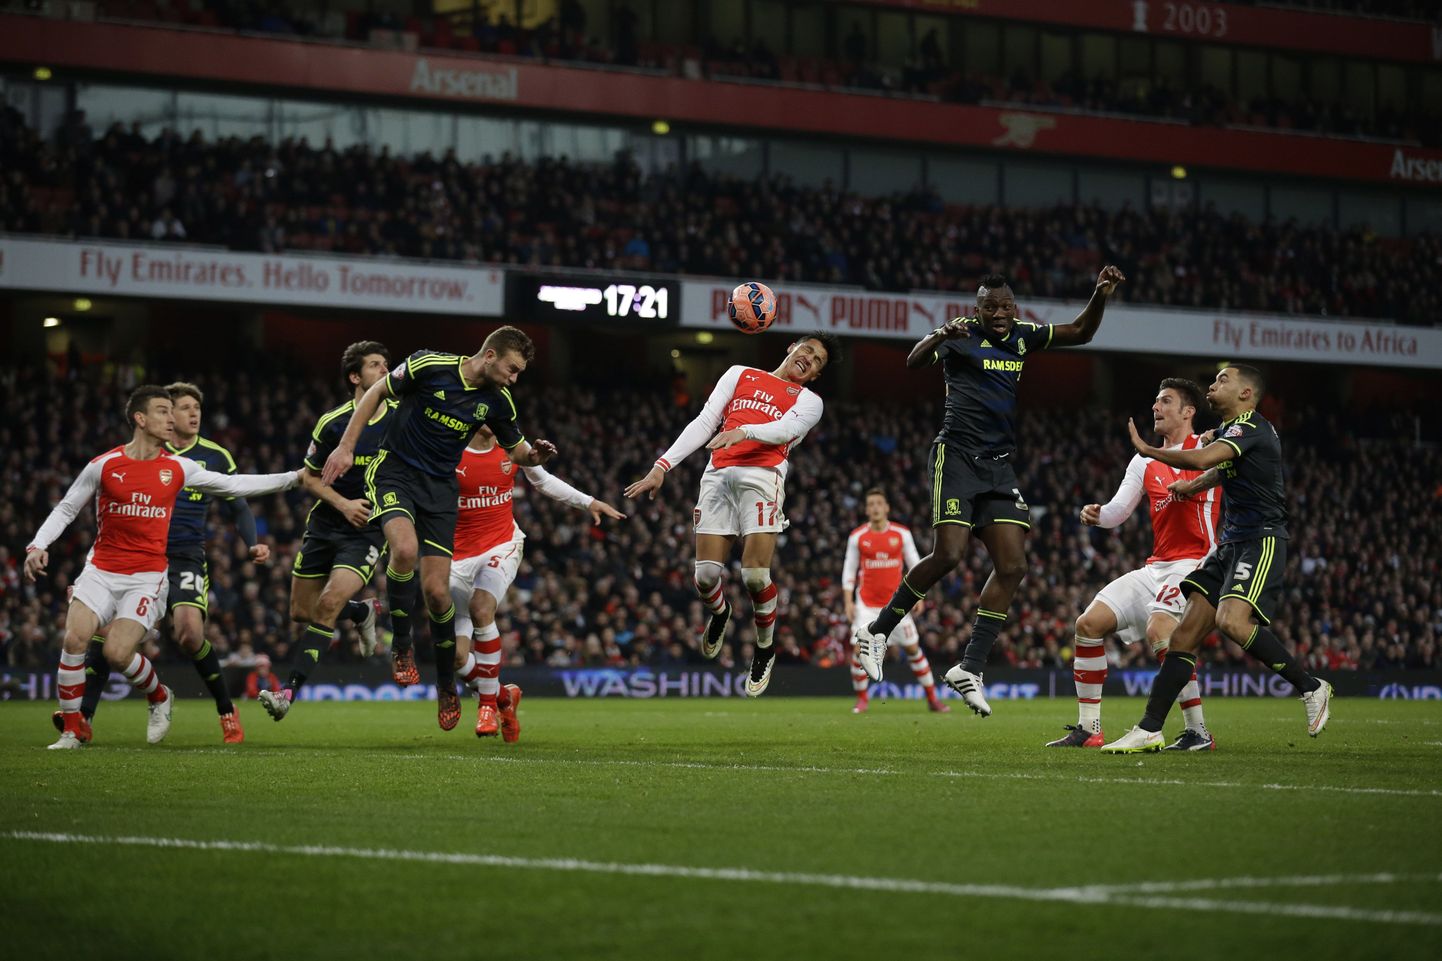 Arsenal's Alexis Sanchez, center, makes a failed attempt to score, during the English FA Cup fifth round soccer match between Arsenal and Middlesbrough at the Emirates Stadium in London, Sunday, Feb. 15, 2015.  (AP Photo/Matt Dunham)